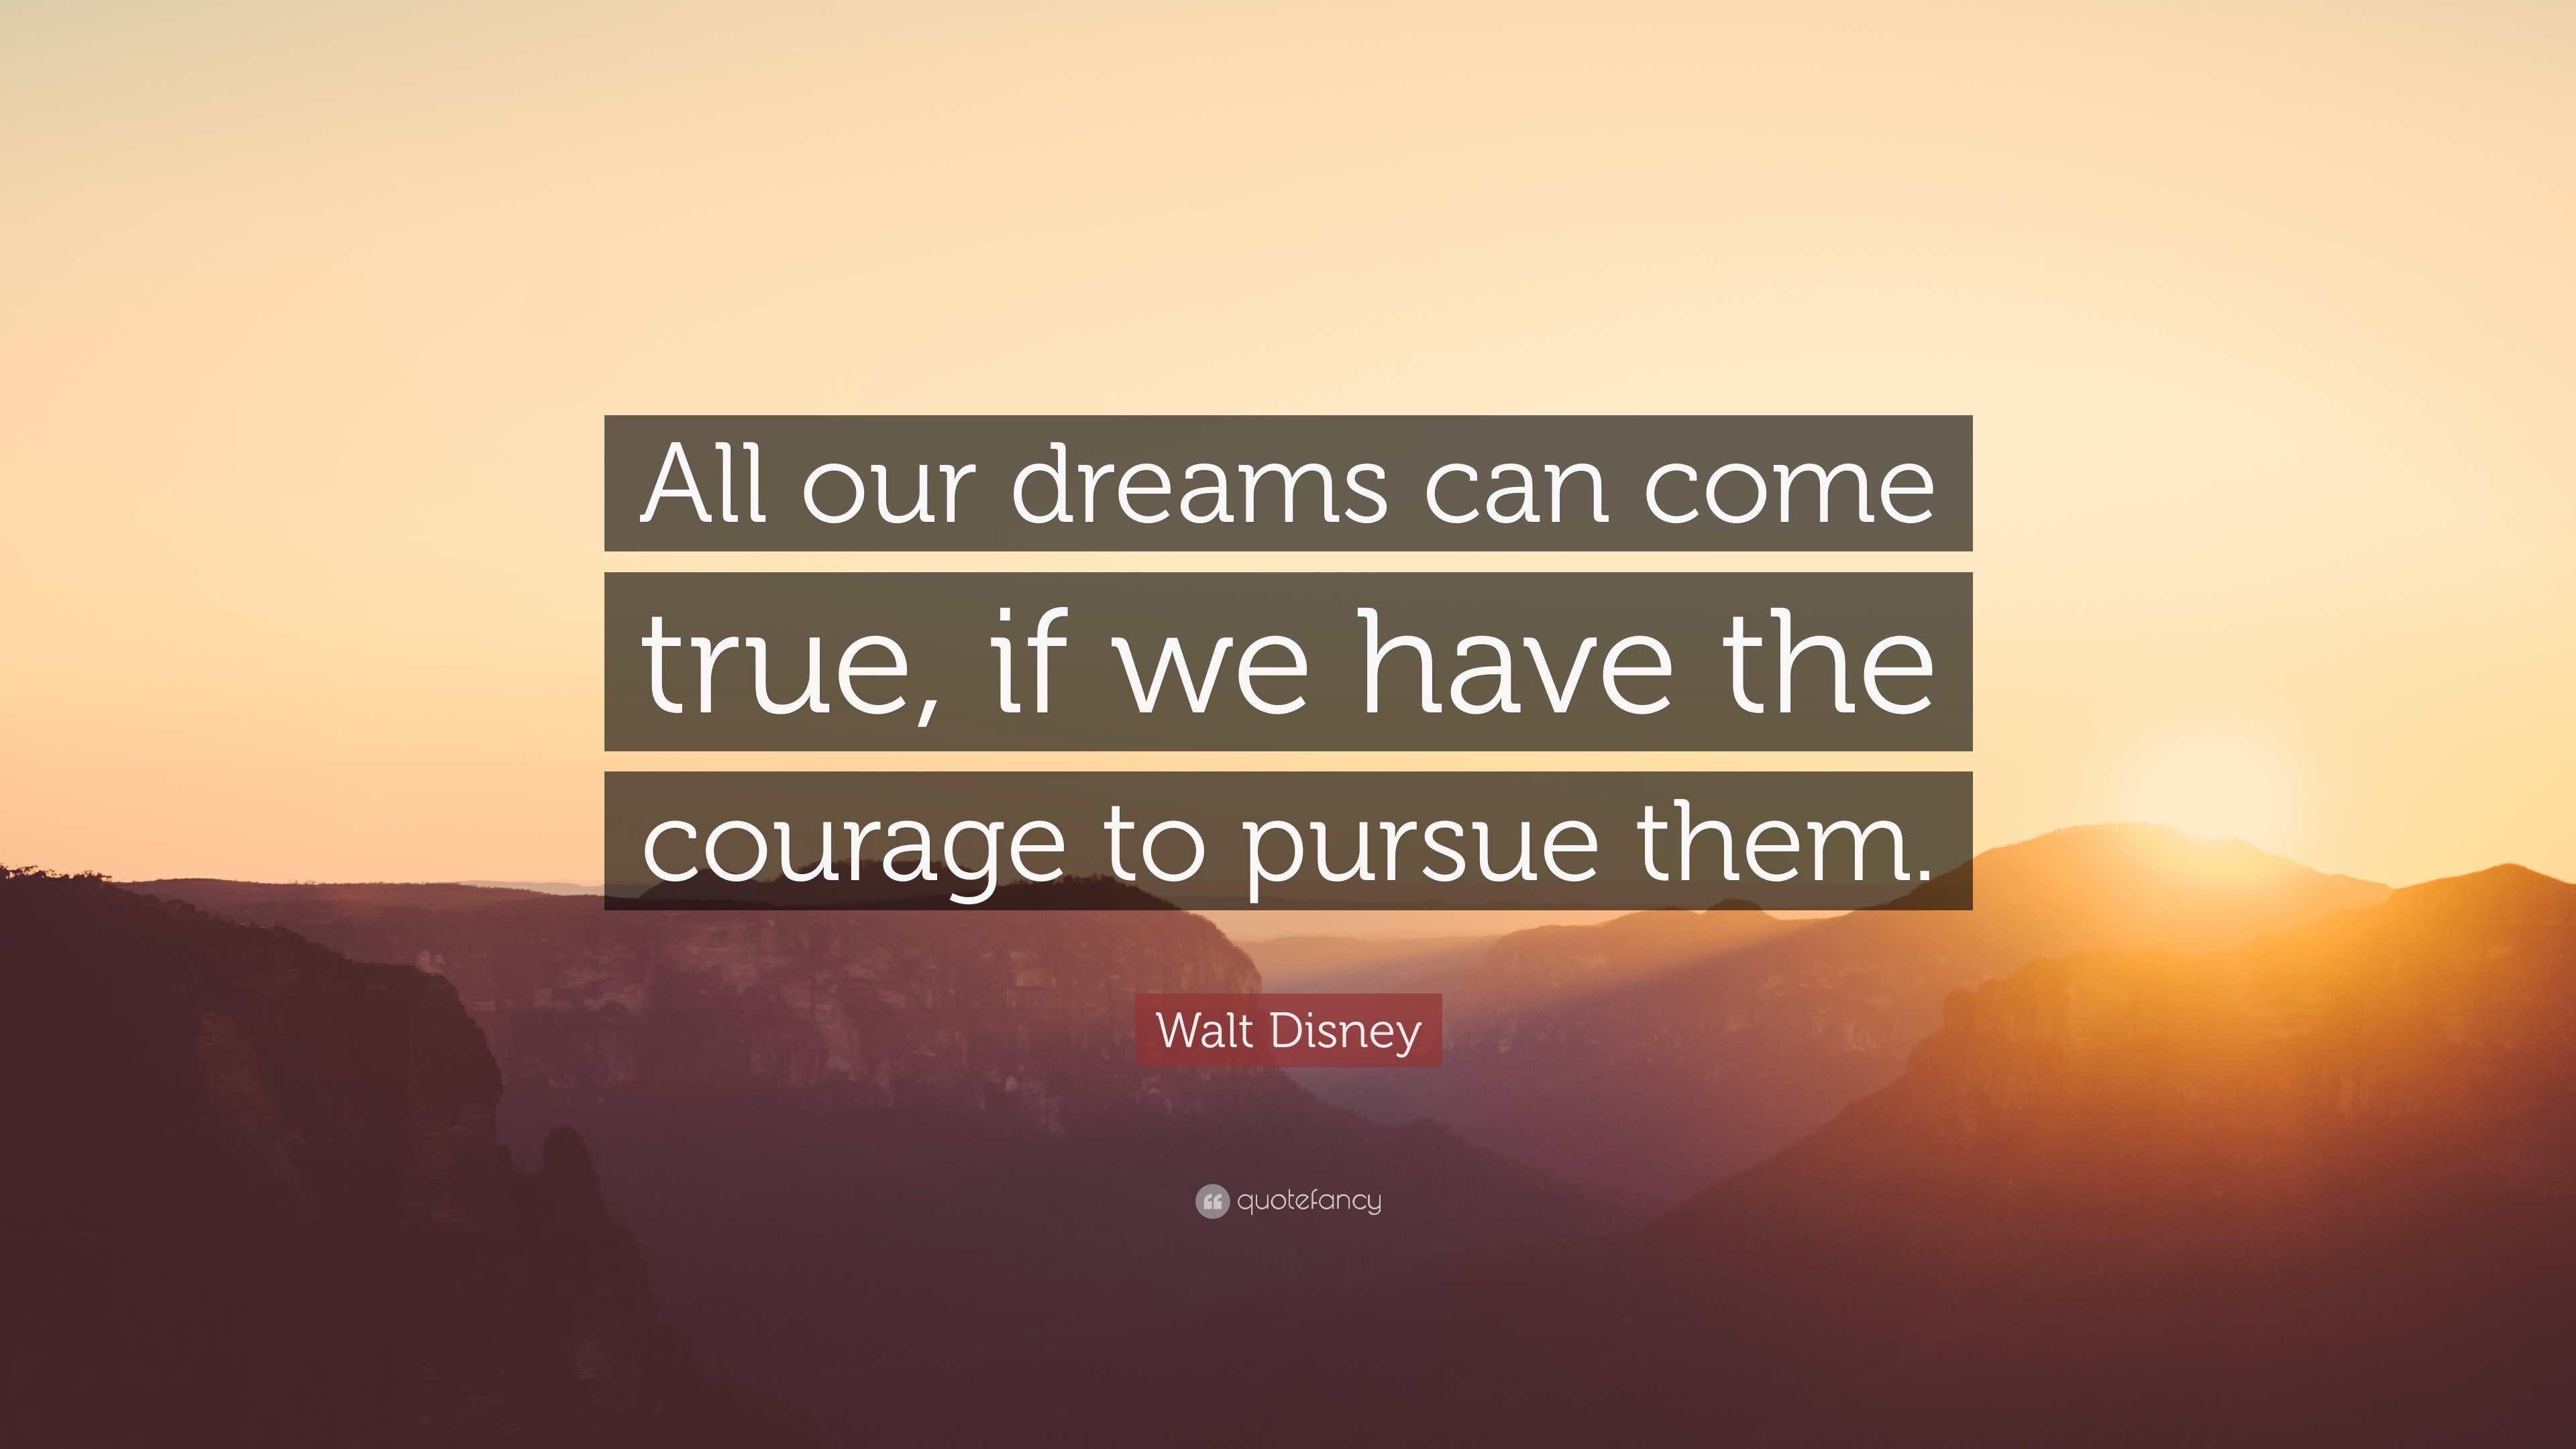 Walt Disney Quote: “All our dreams can come true, if we have the